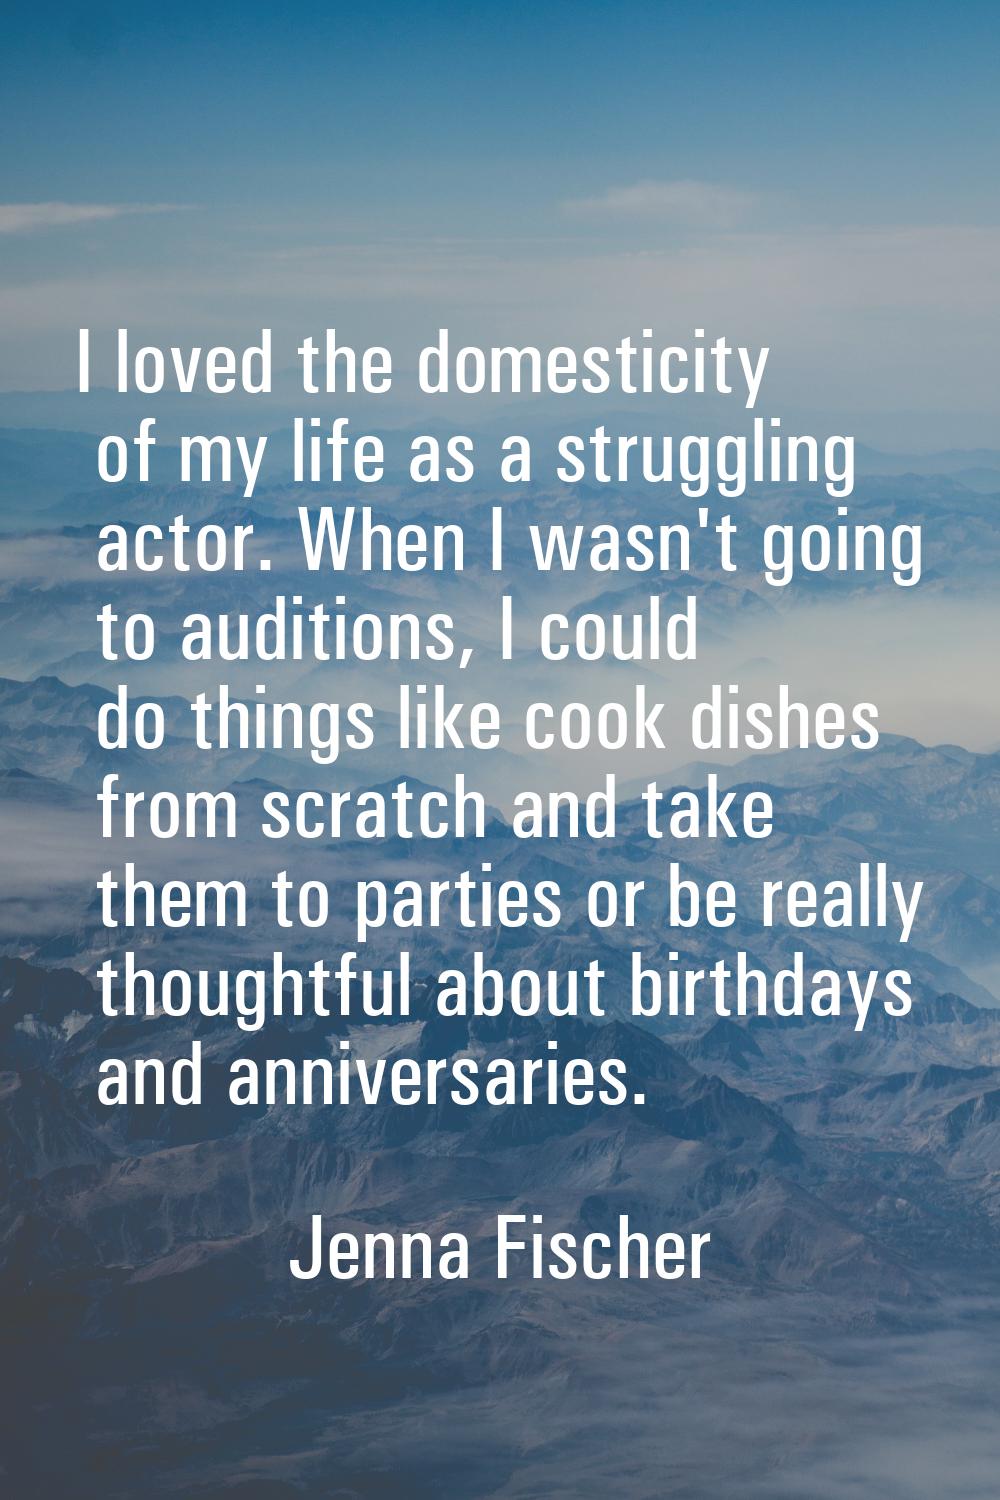 I loved the domesticity of my life as a struggling actor. When I wasn't going to auditions, I could